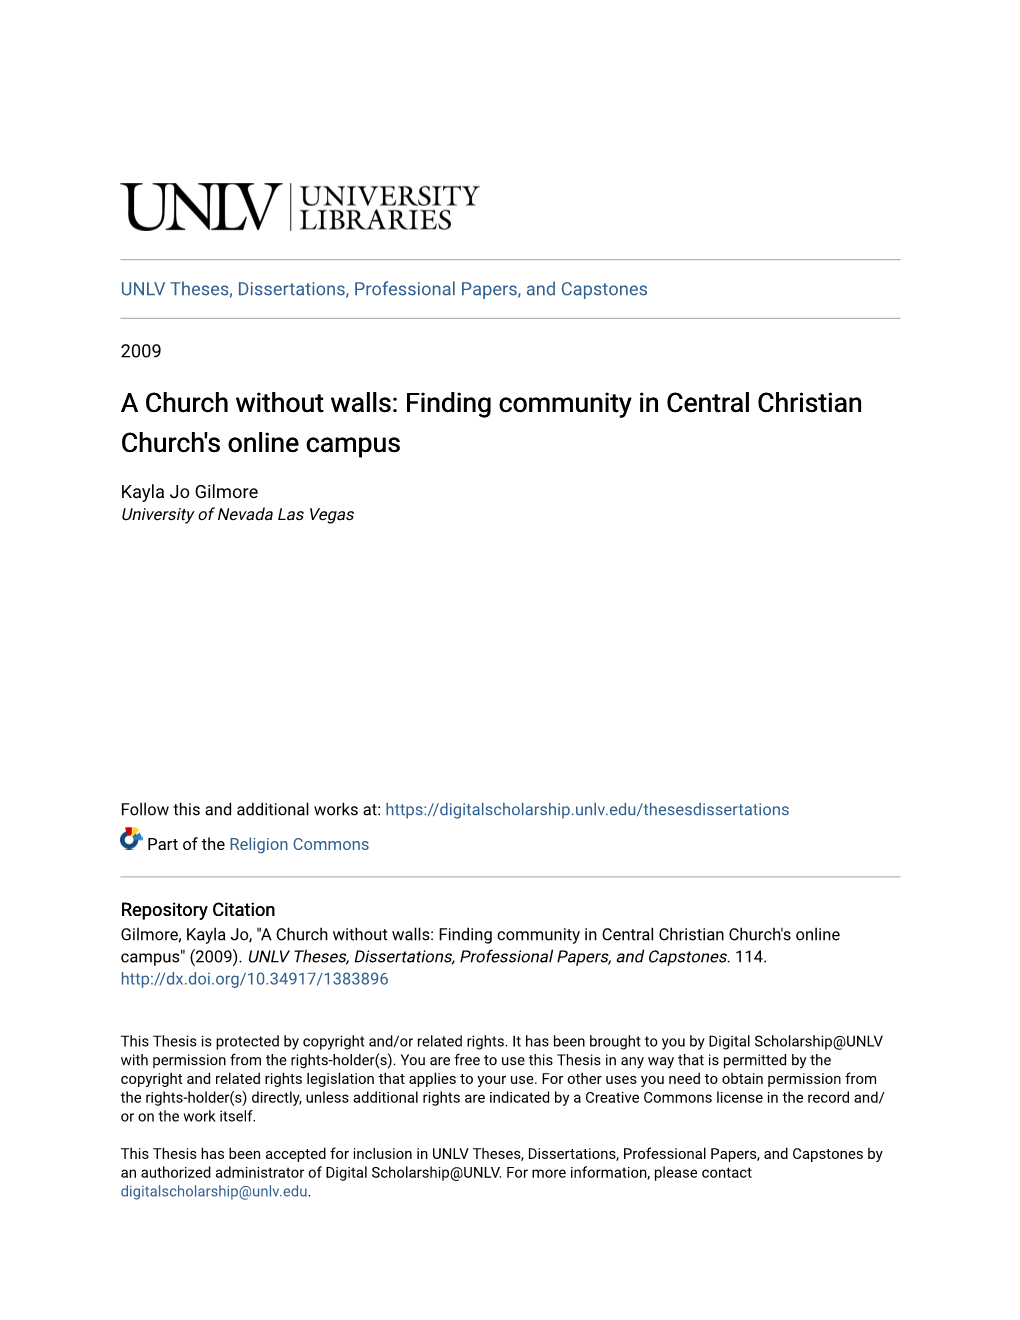 A Church Without Walls: Finding Community in Central Christian Church's Online Campus